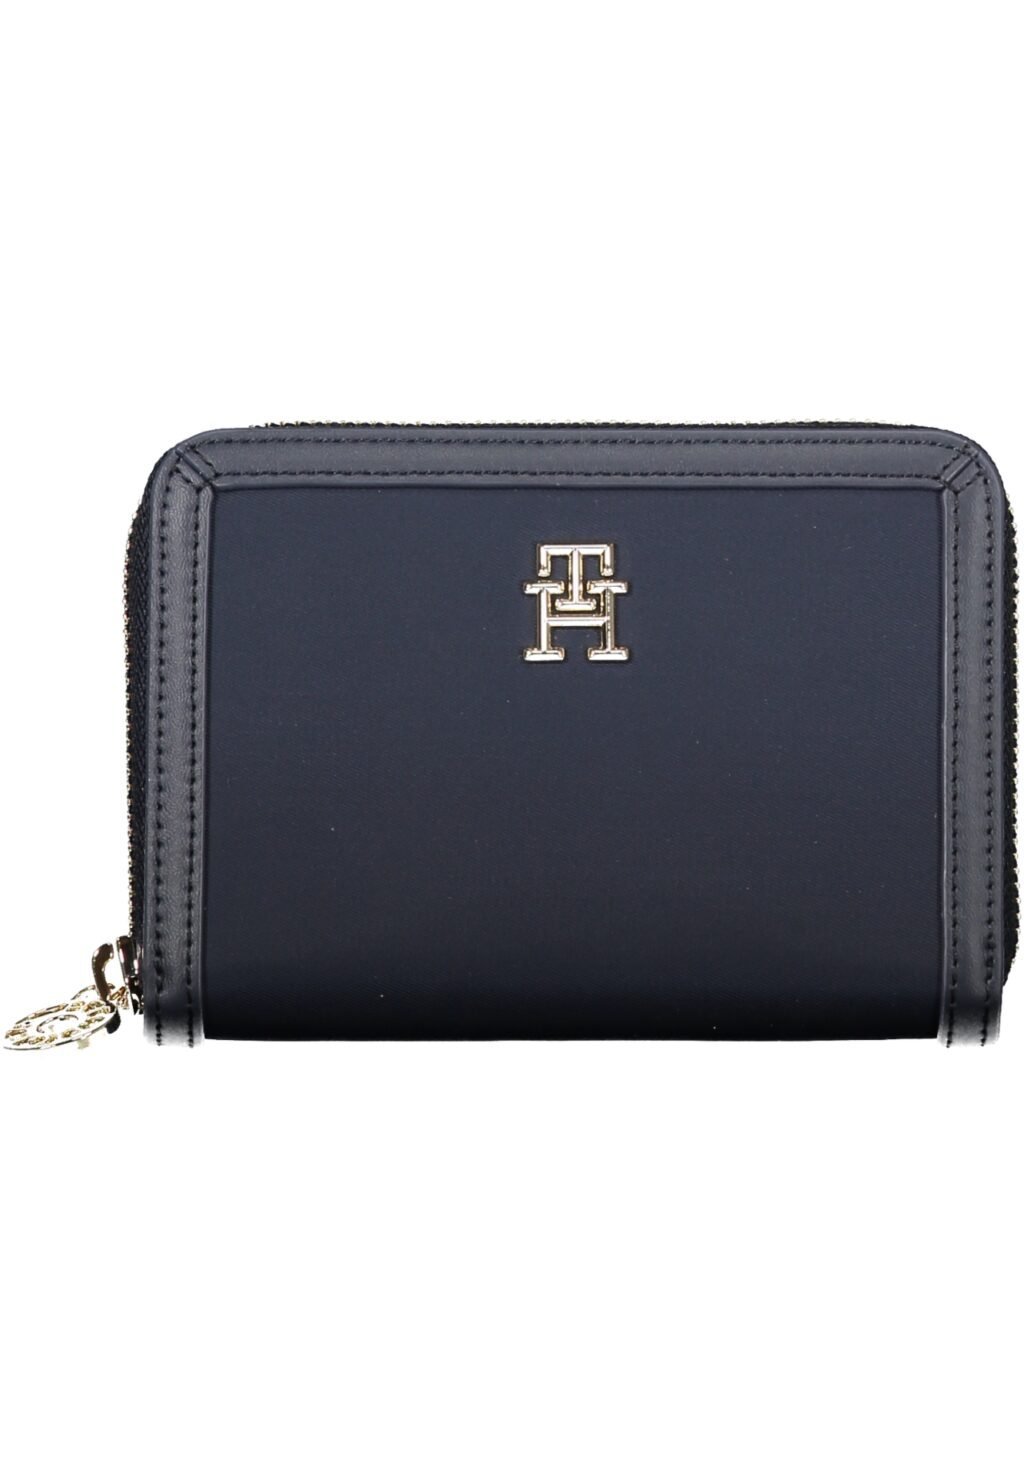 TOMMY HILFIGER WOMEN'S WALLET BLUE AW0AW15754_BLDW6